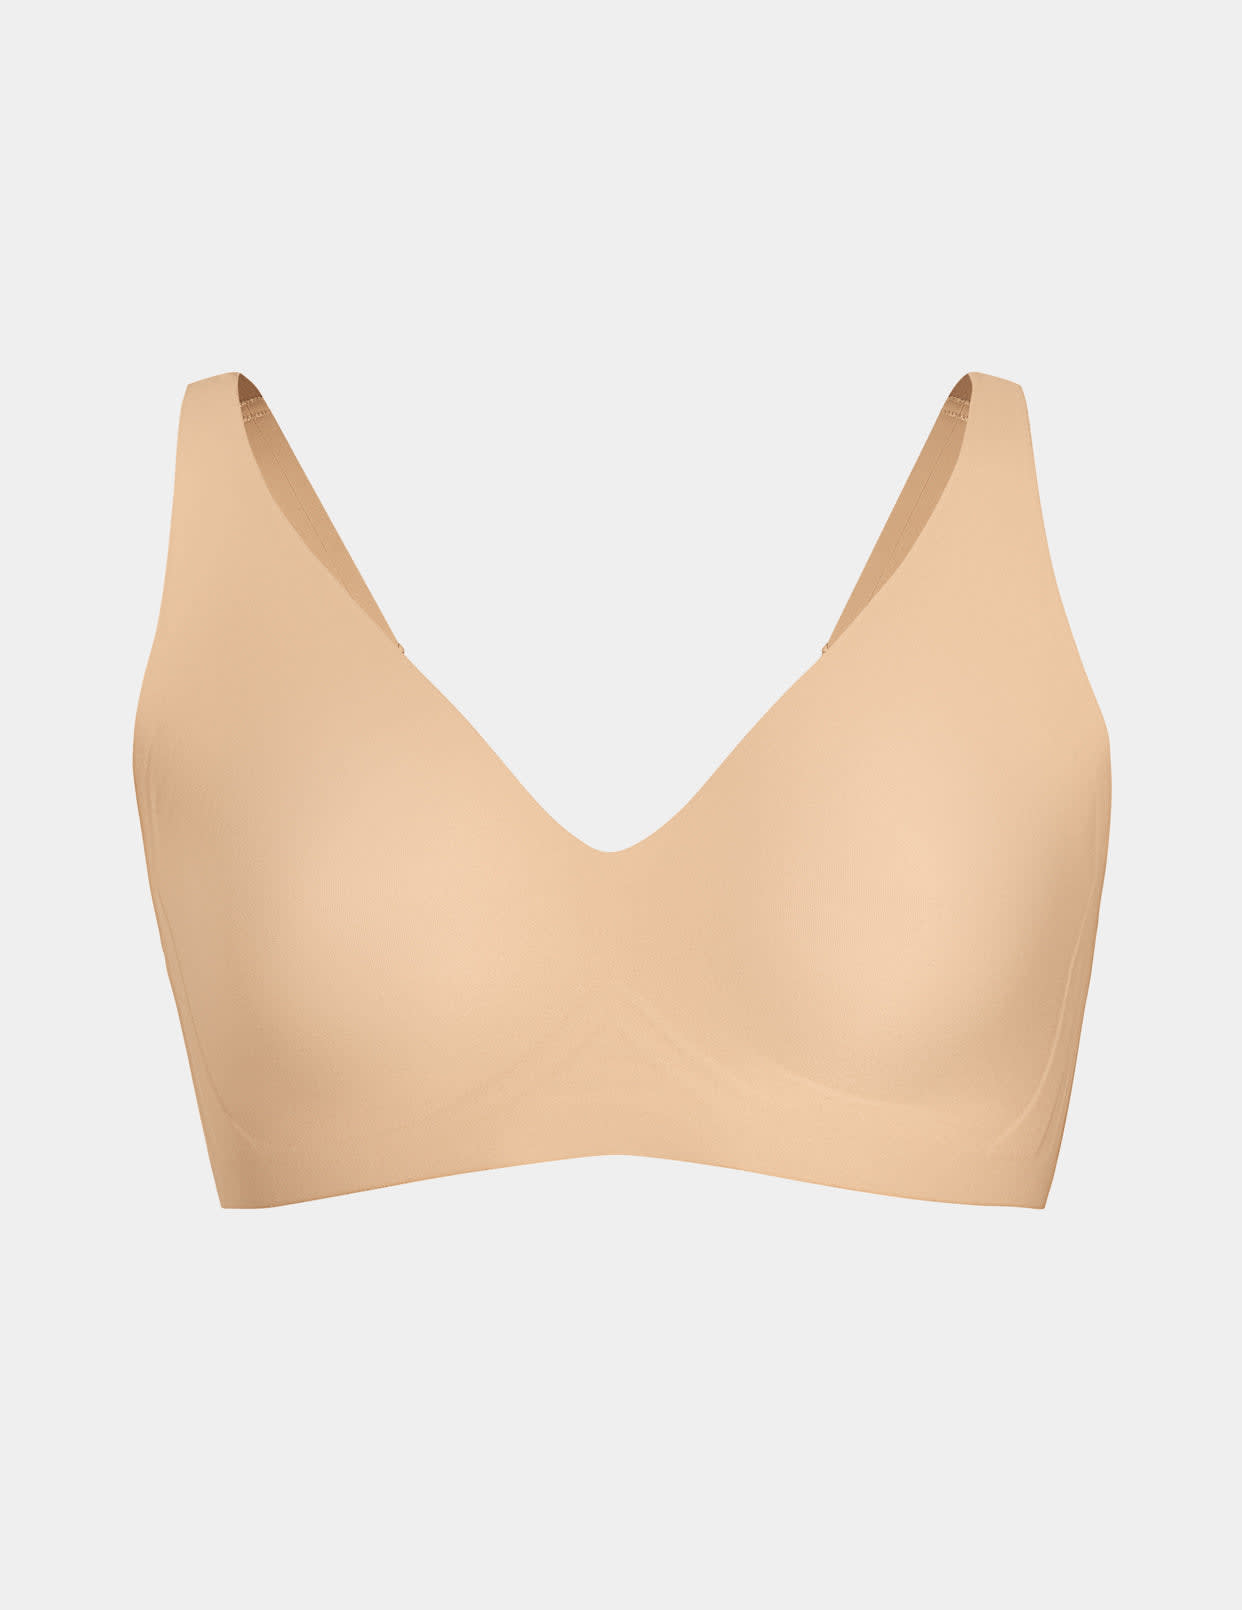 What are some brands that sell well-made, comfortable bras without